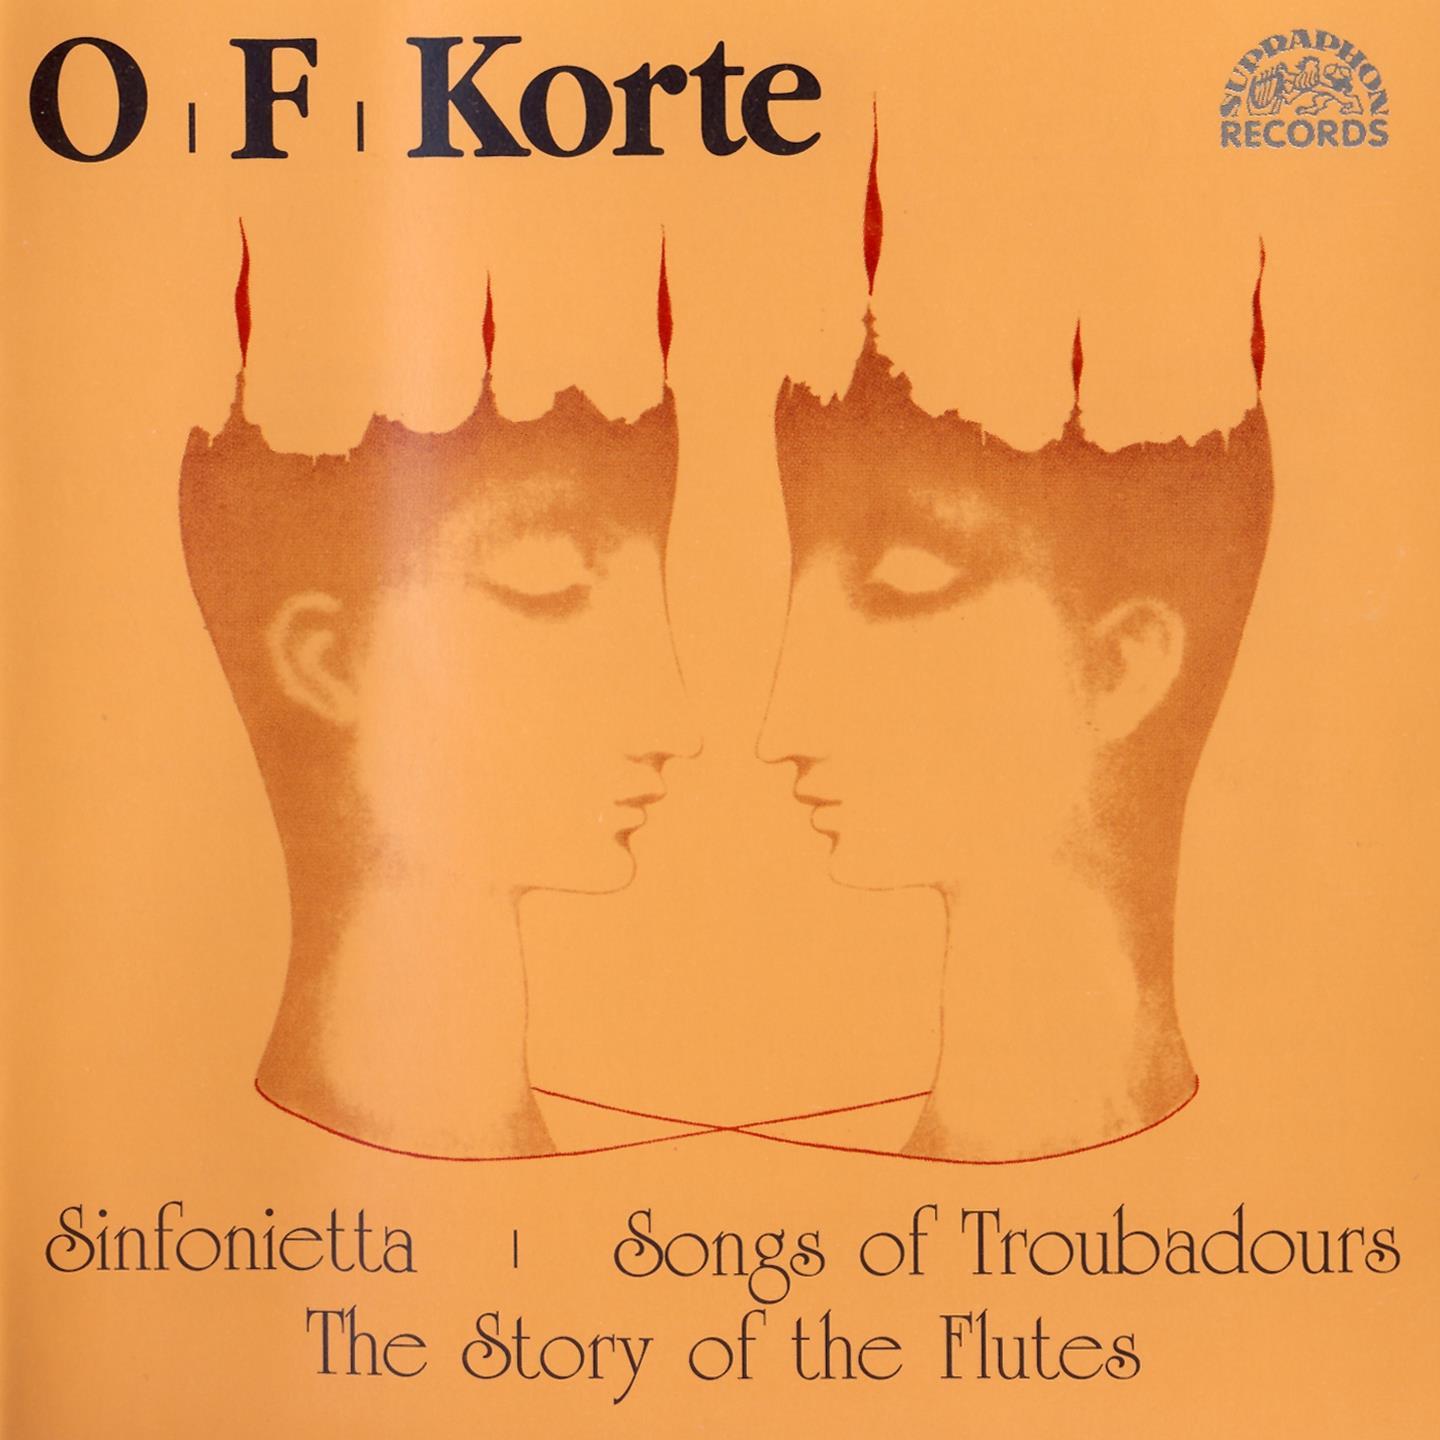 Songs of Troubadours: No. 3, Vultures Nor Kites